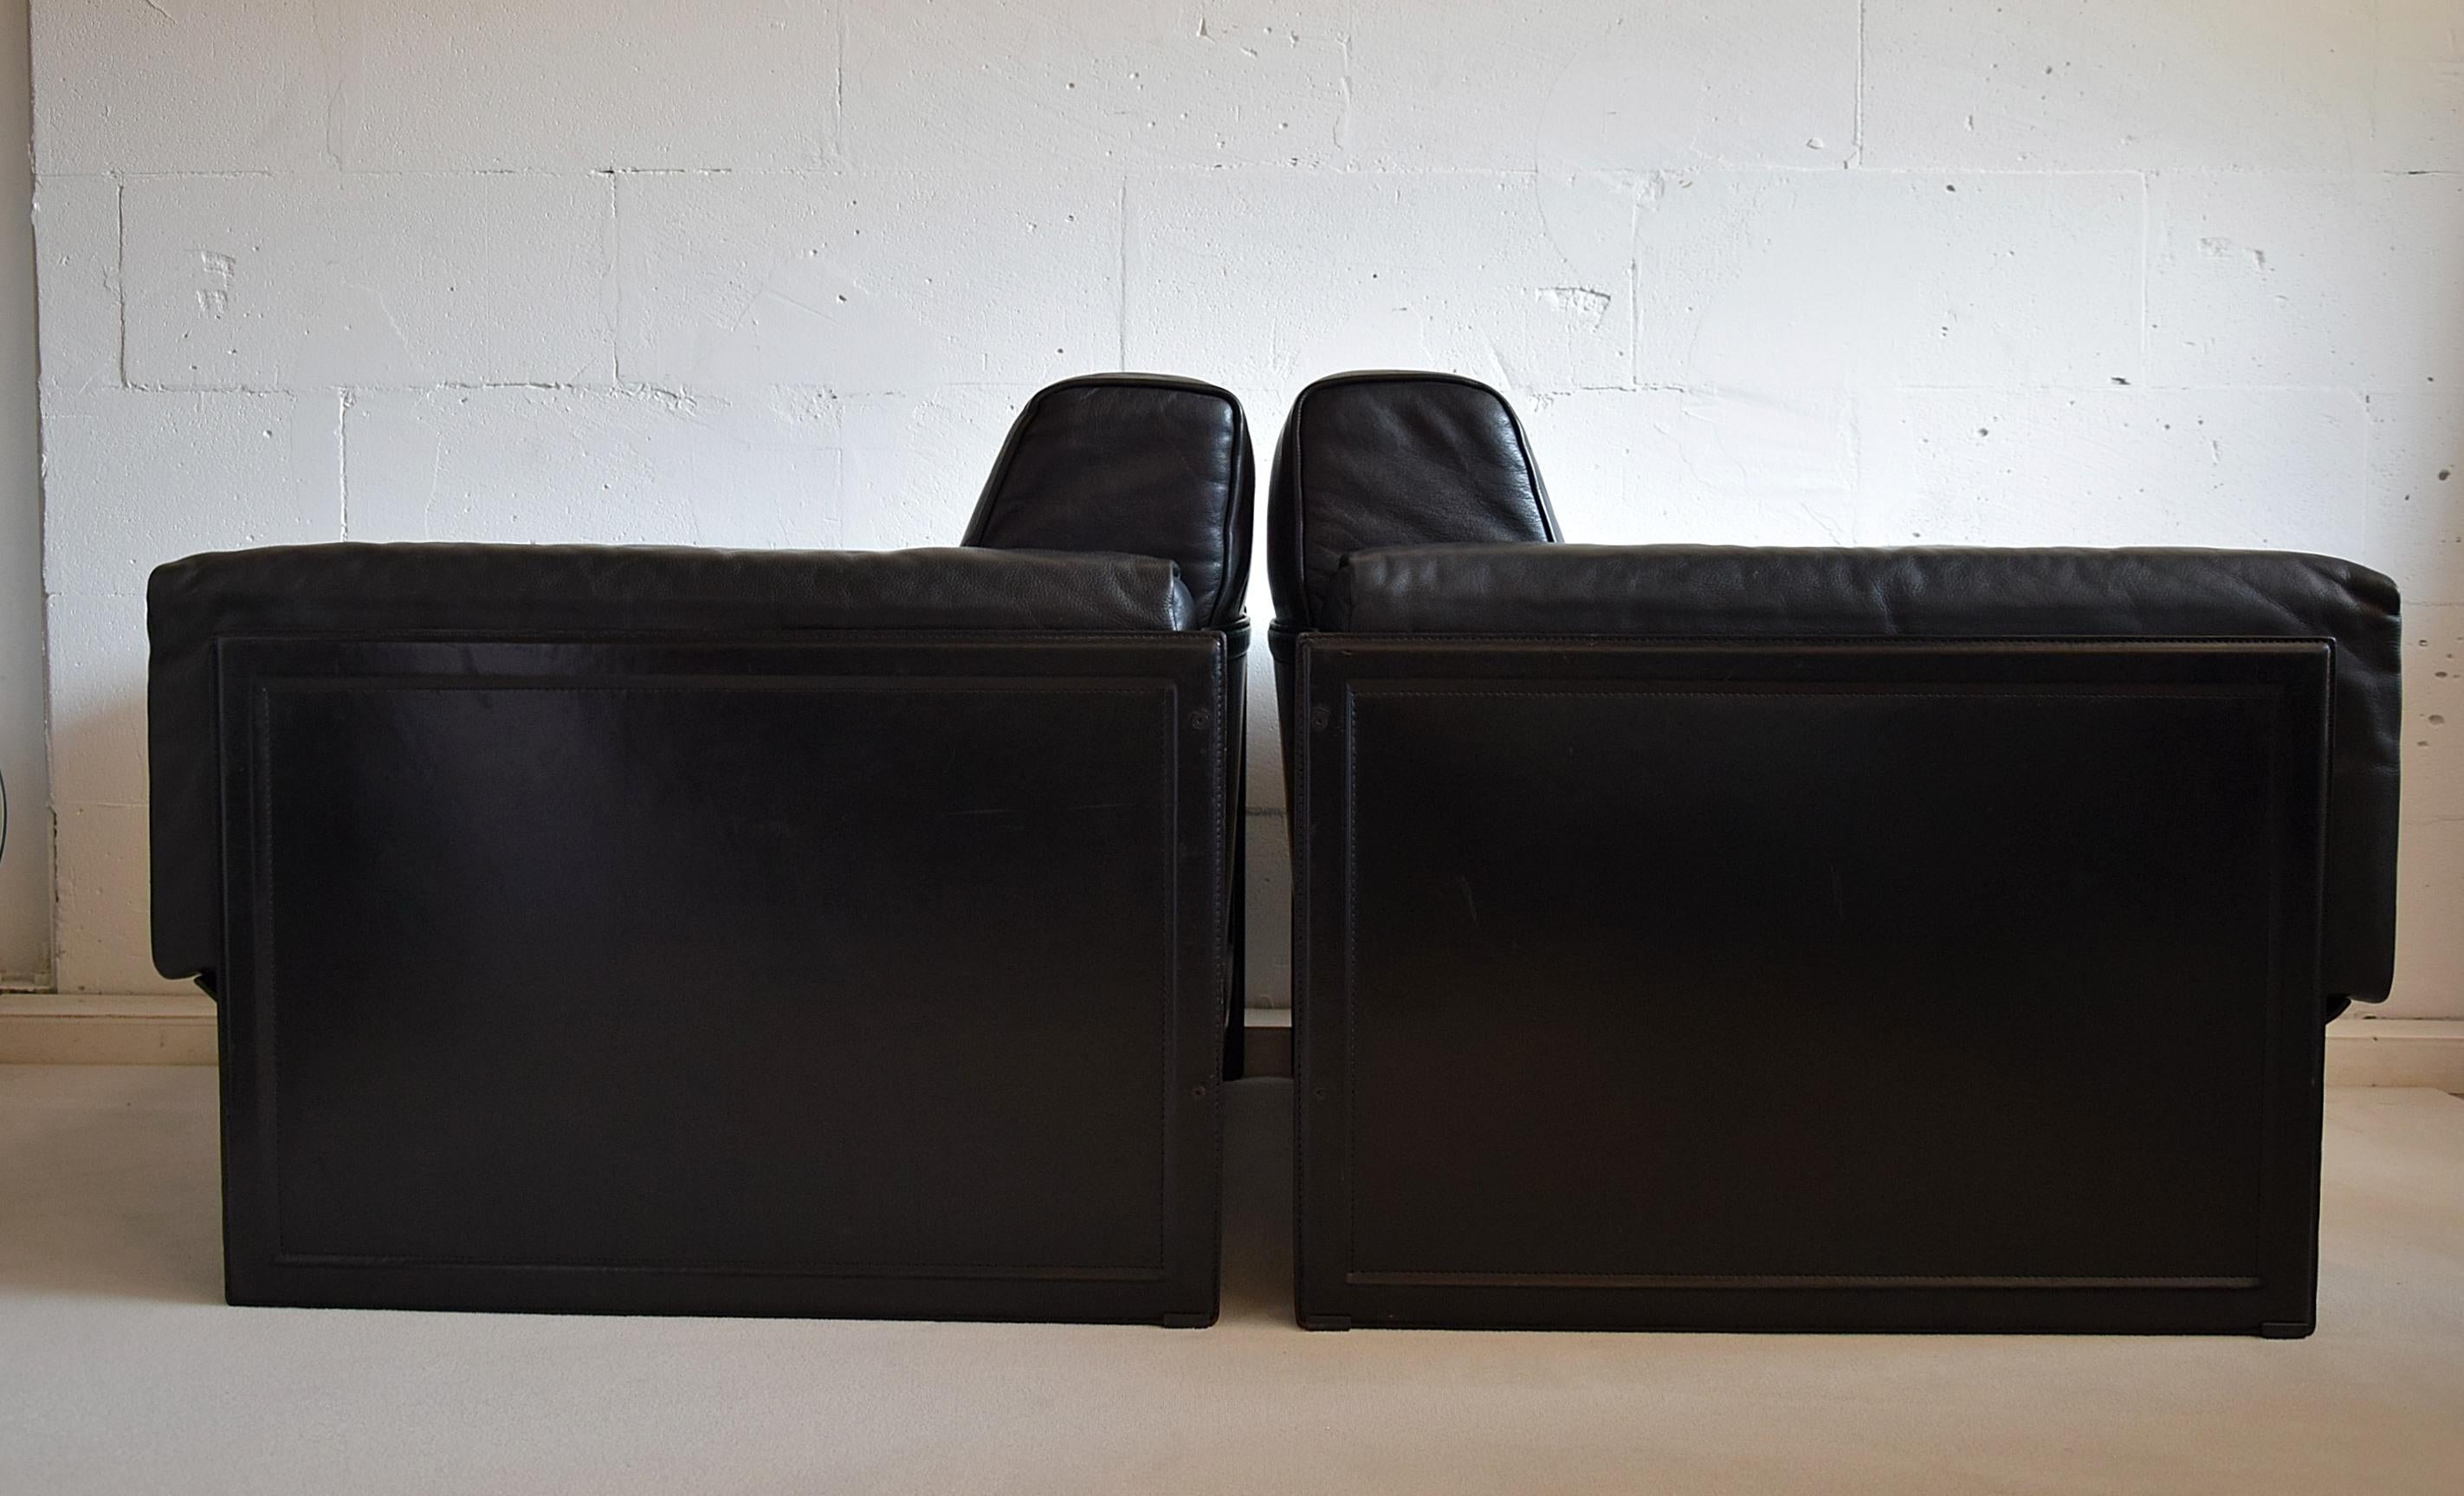 Late 20th Century Pair of Korium Black Leather Lounge Chairs by Tito Agnoli for Matteo Grassi For Sale